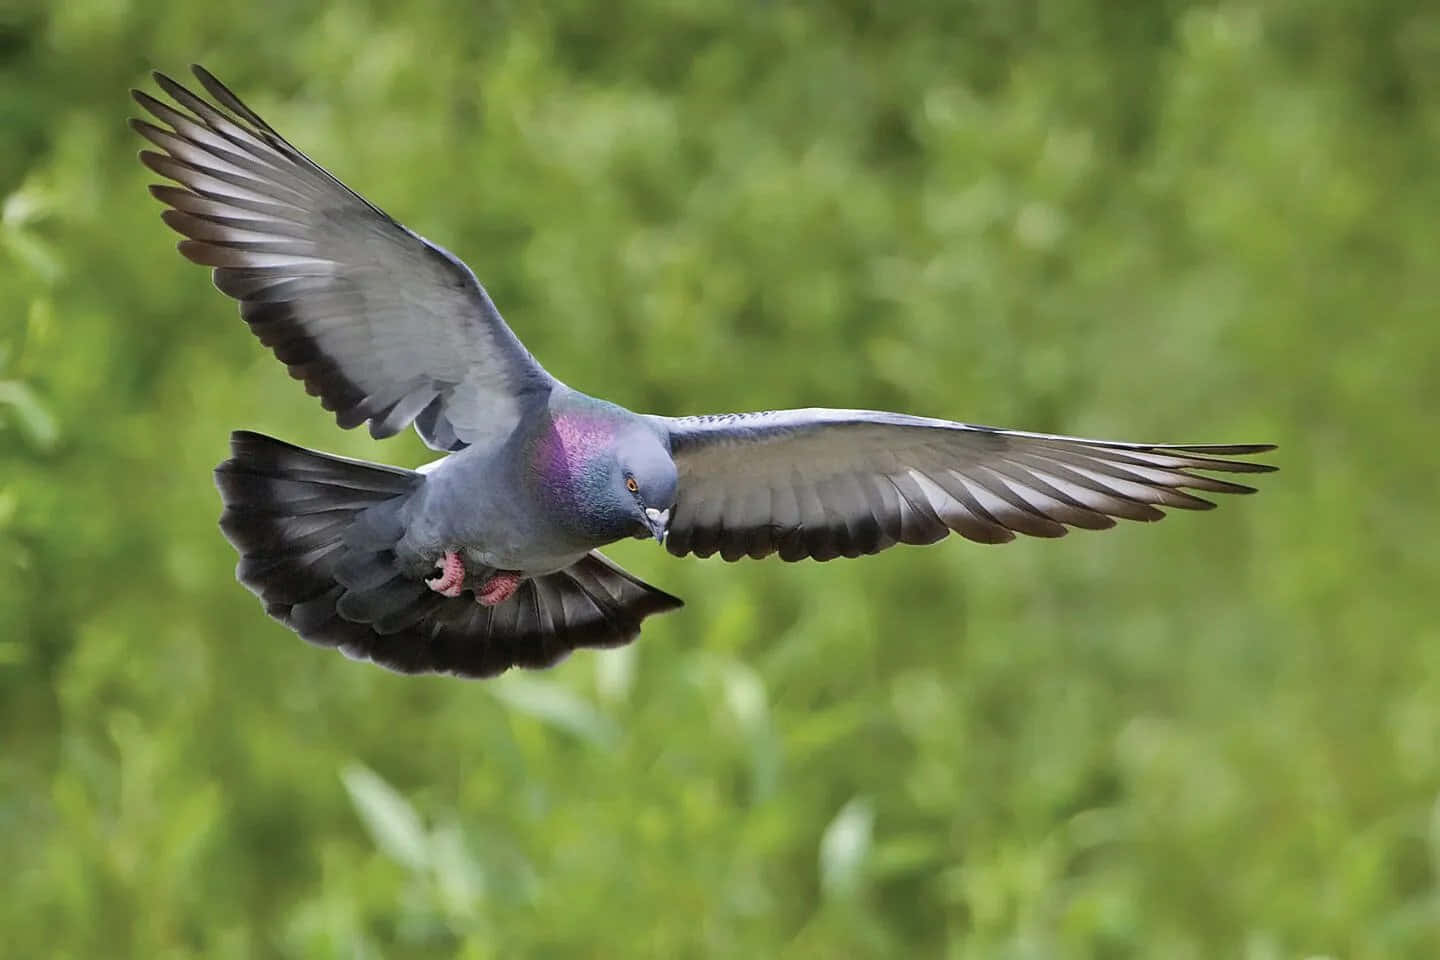 A pigeon takes flight in a lush green garden